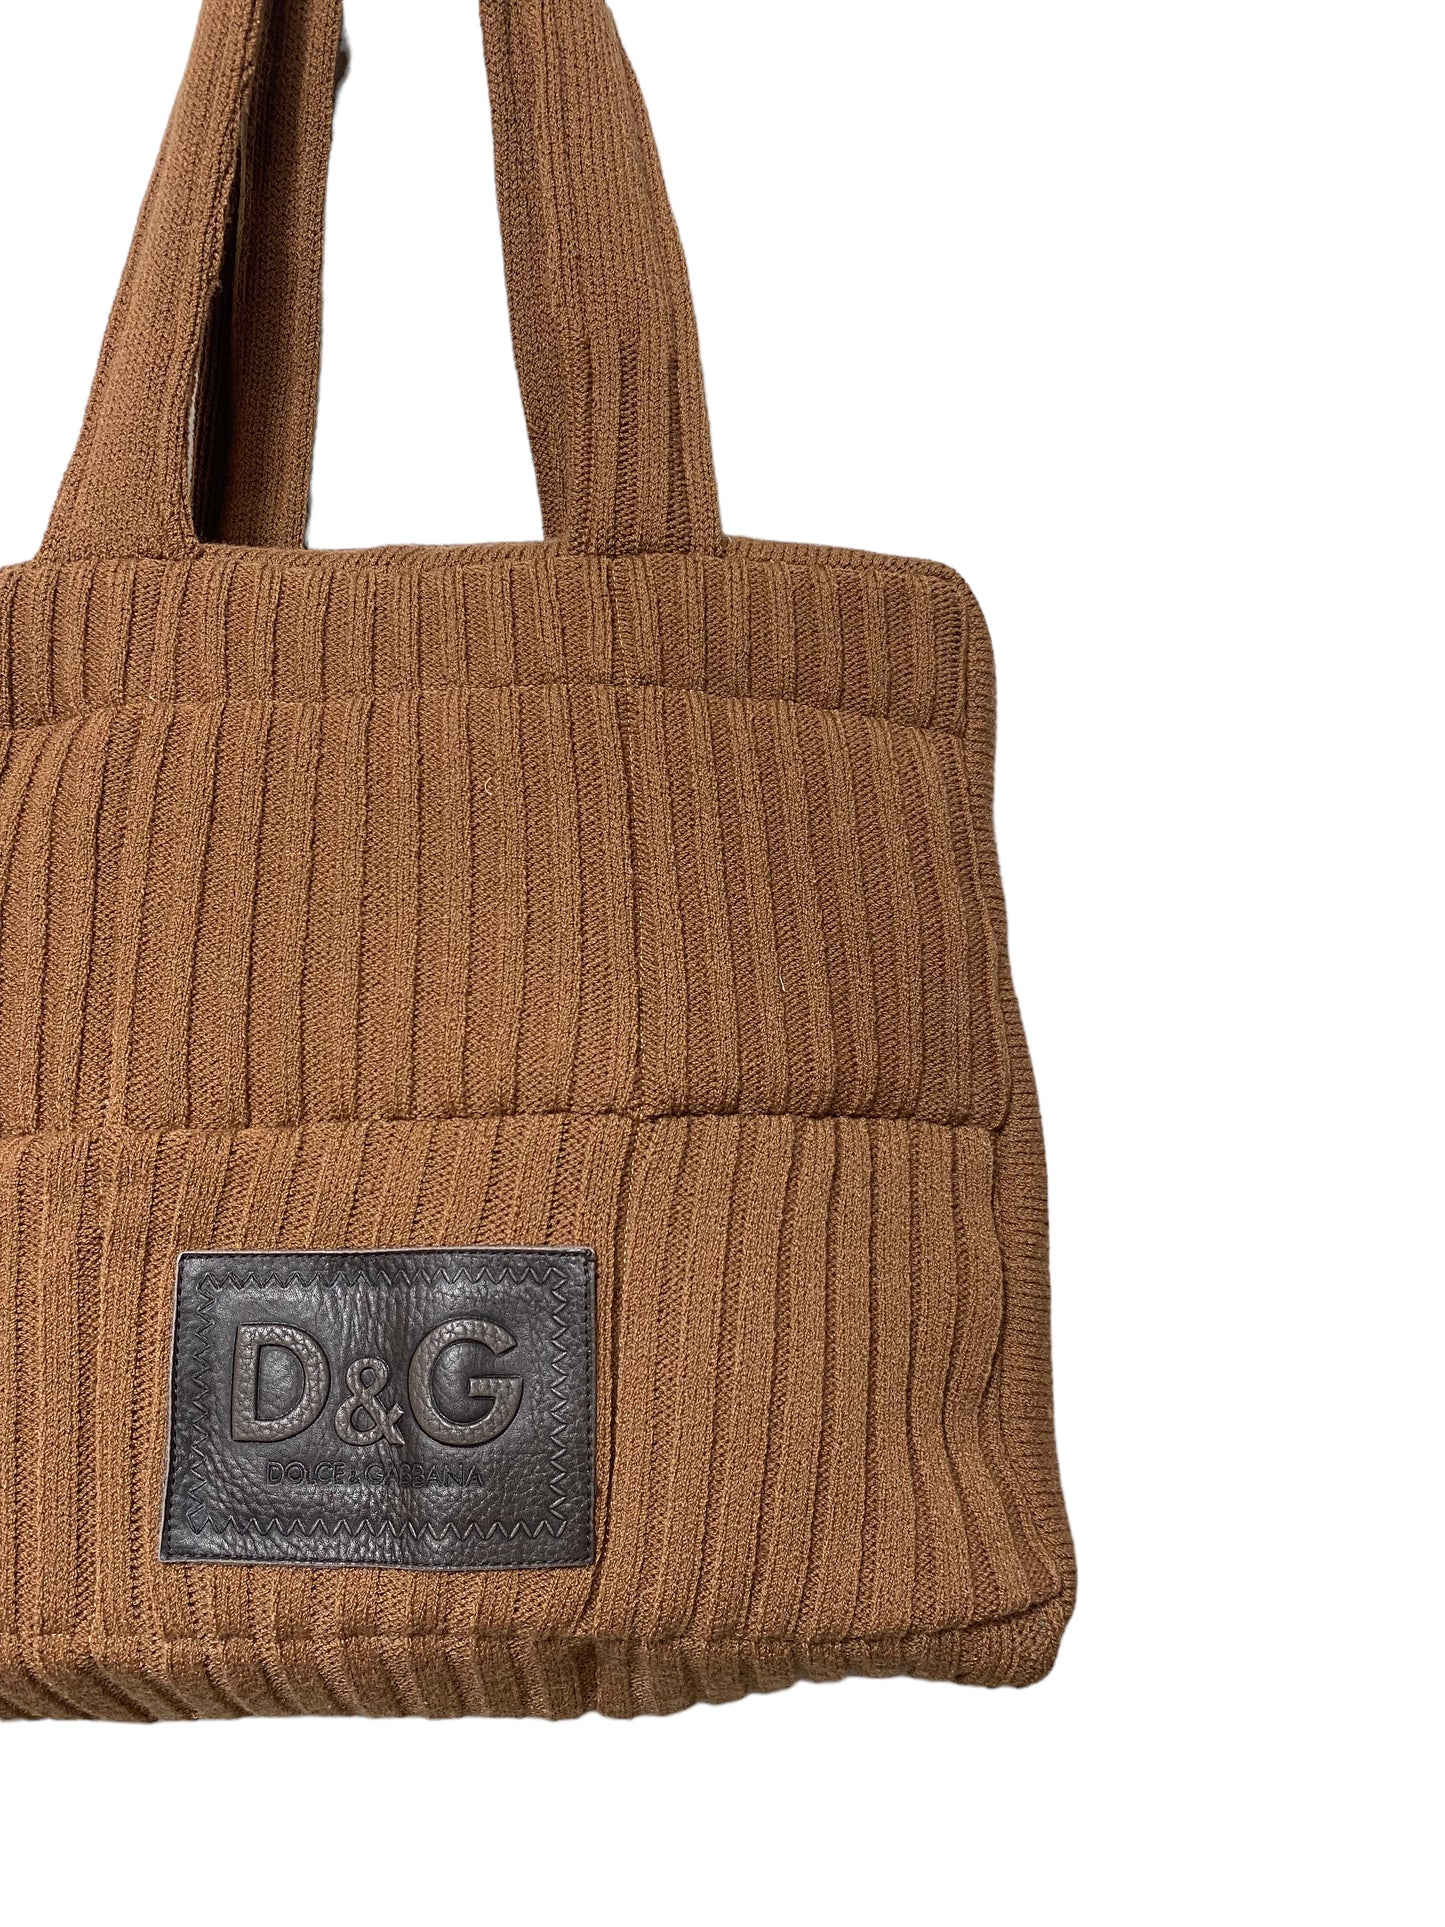 Bolso Reworked D&G